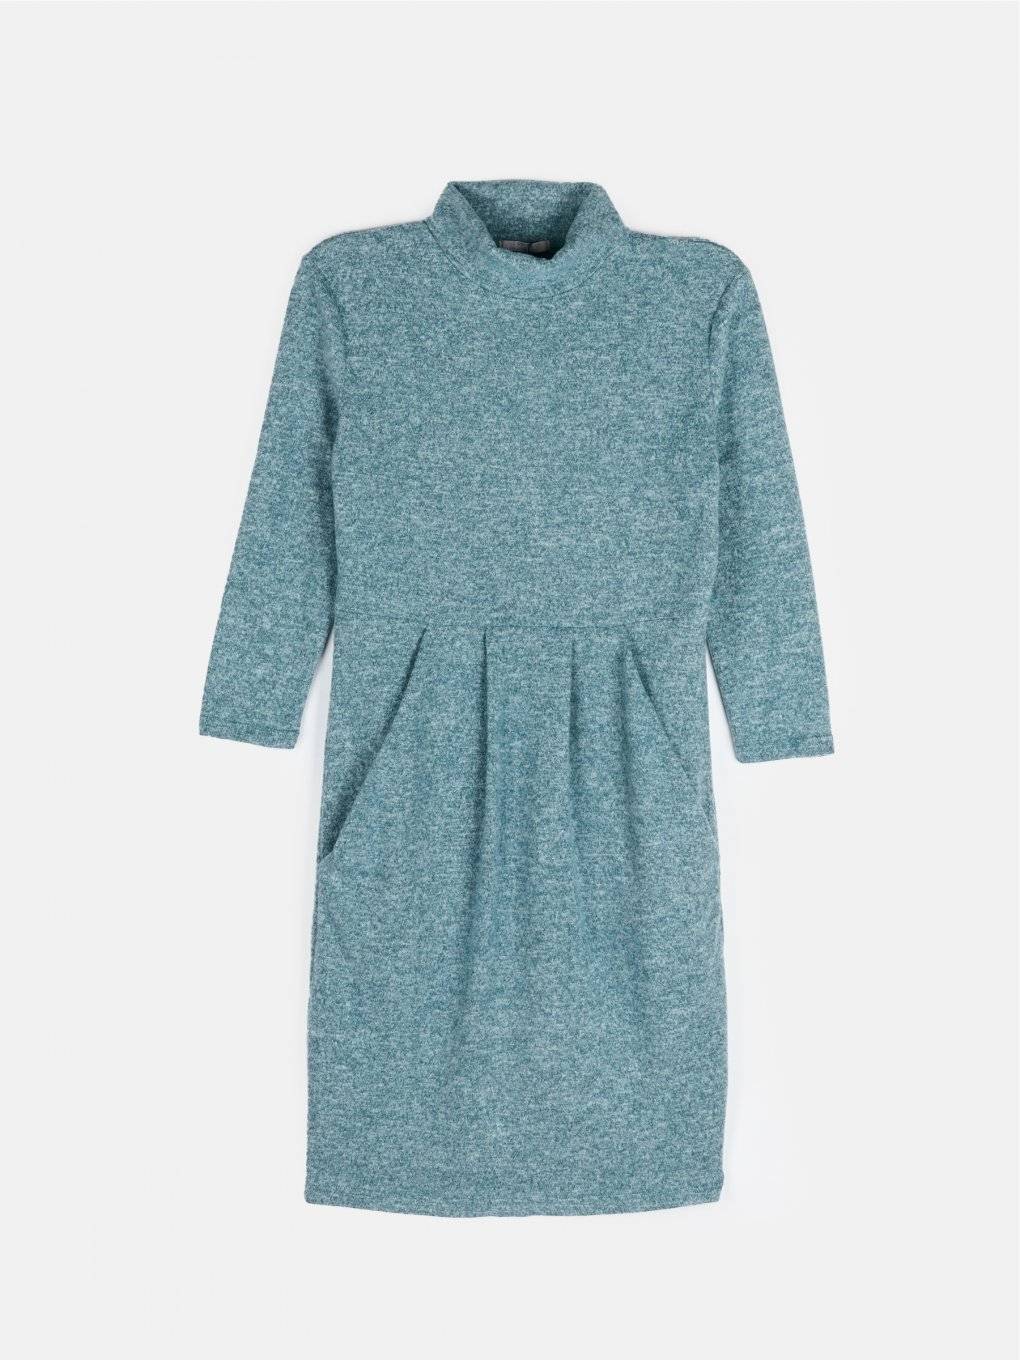 Ladies roll neck dress with pockets